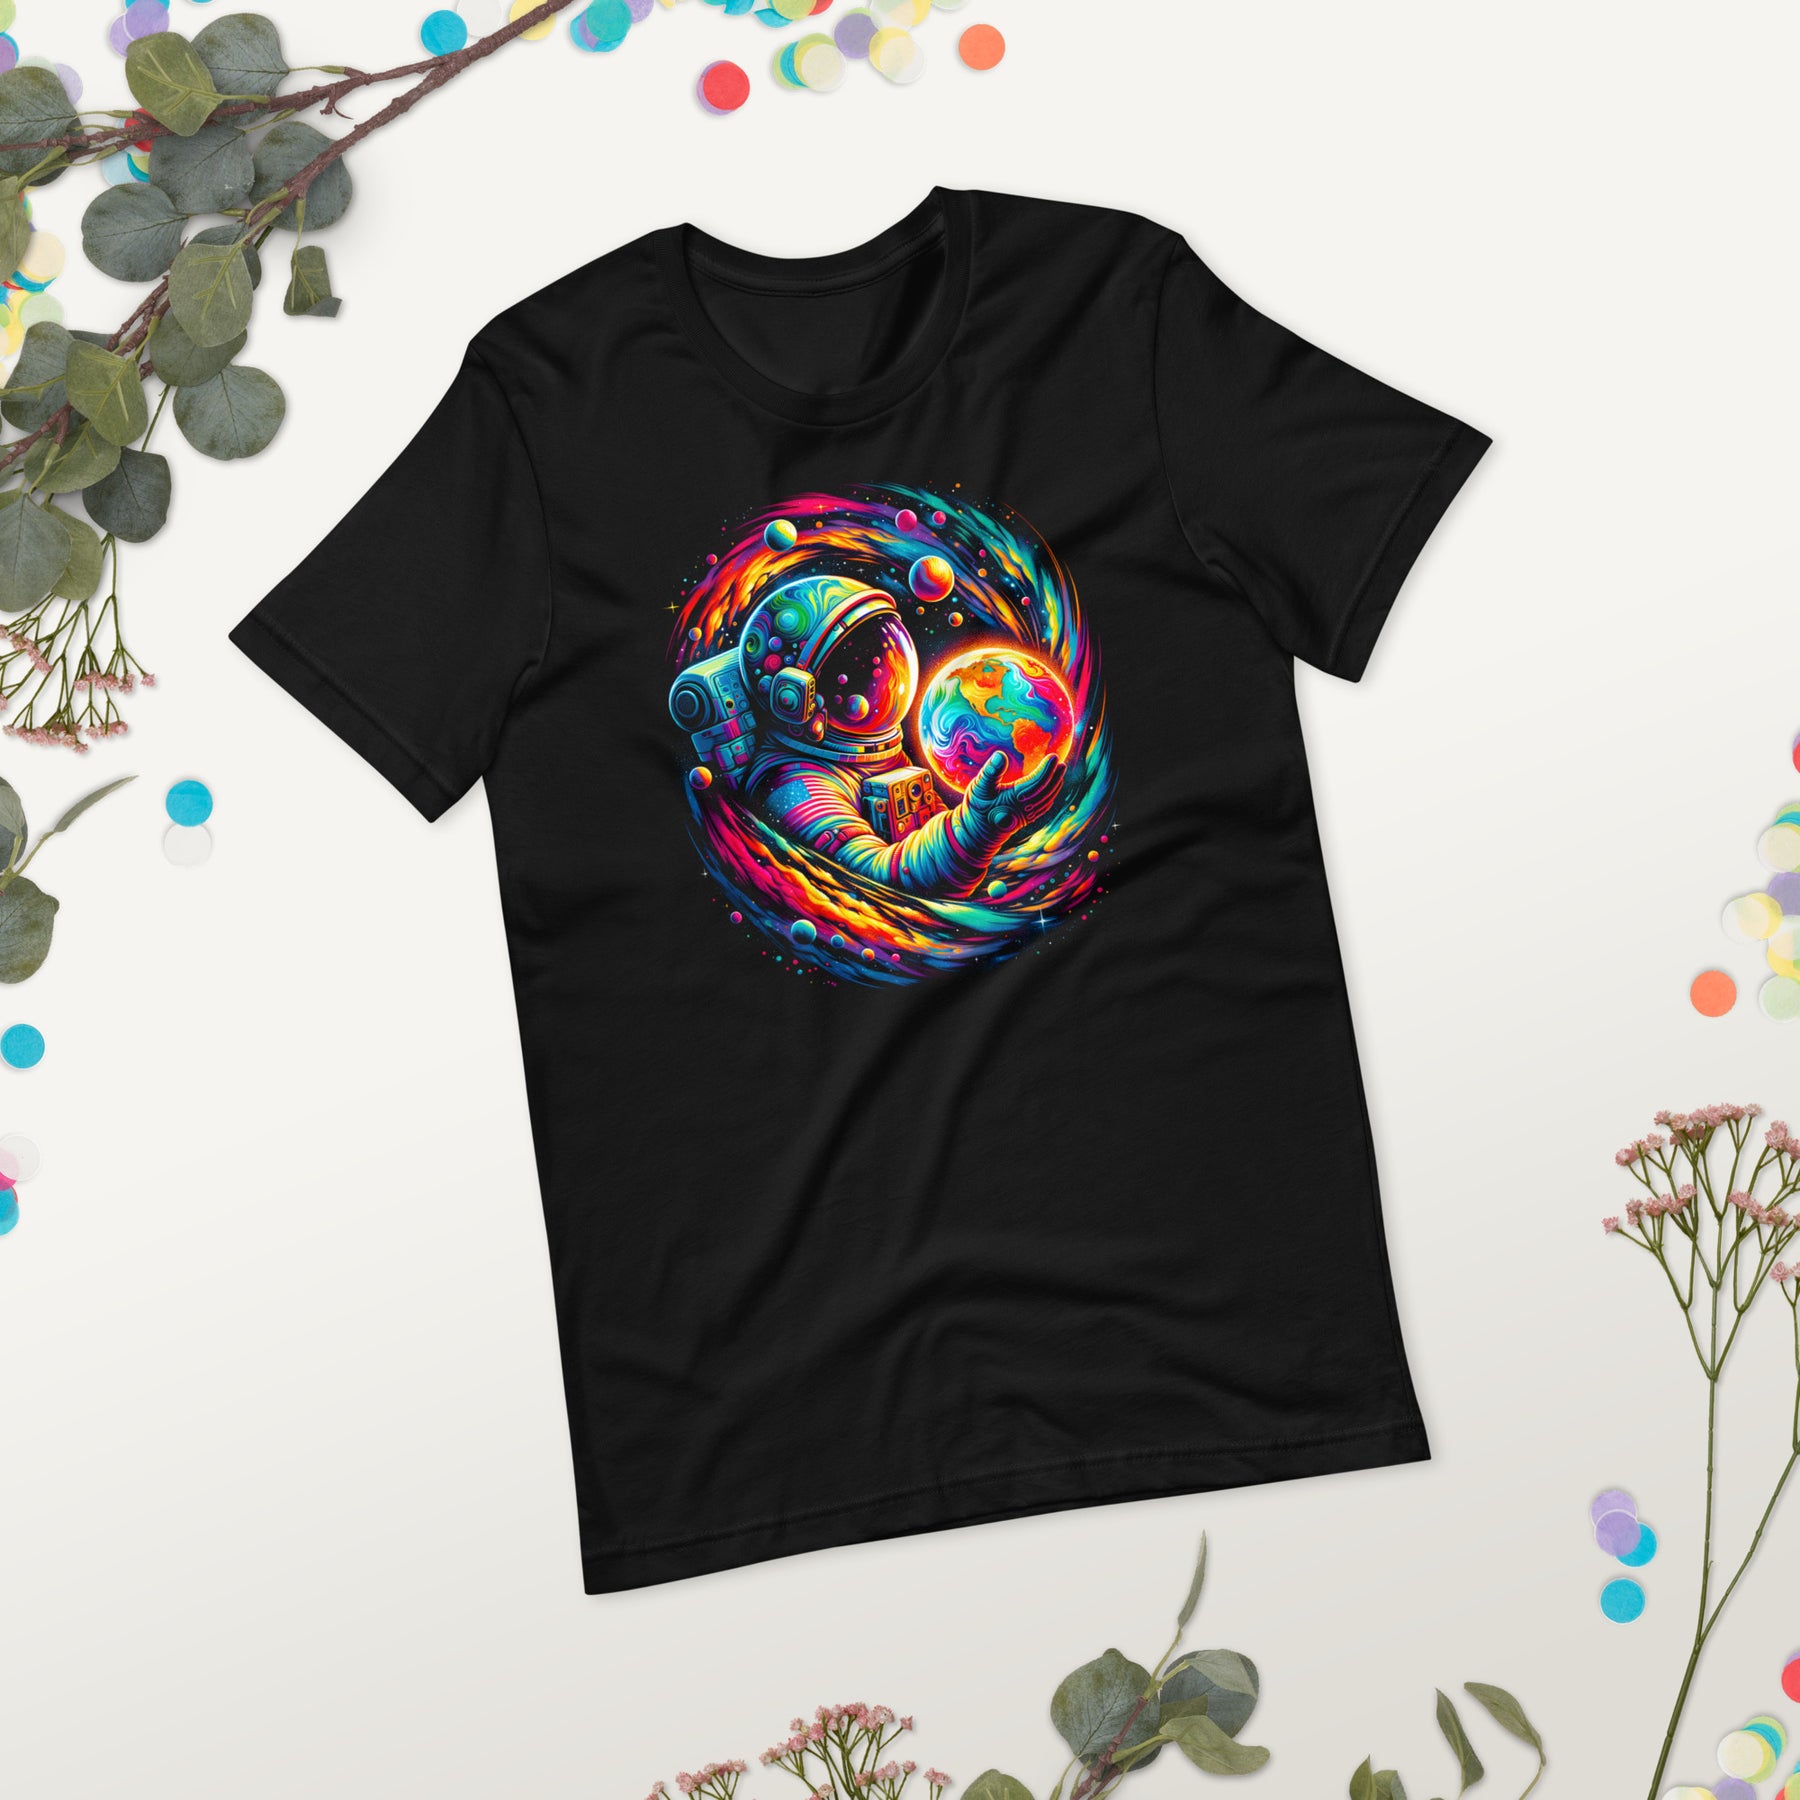 Spaceman Embracing Earth Shirt, Cosmic Explorer Astronaut Tee, Psychedelic Galaxy Design, Outer Space Apparel, Sci-Fi Enthusiast Gift